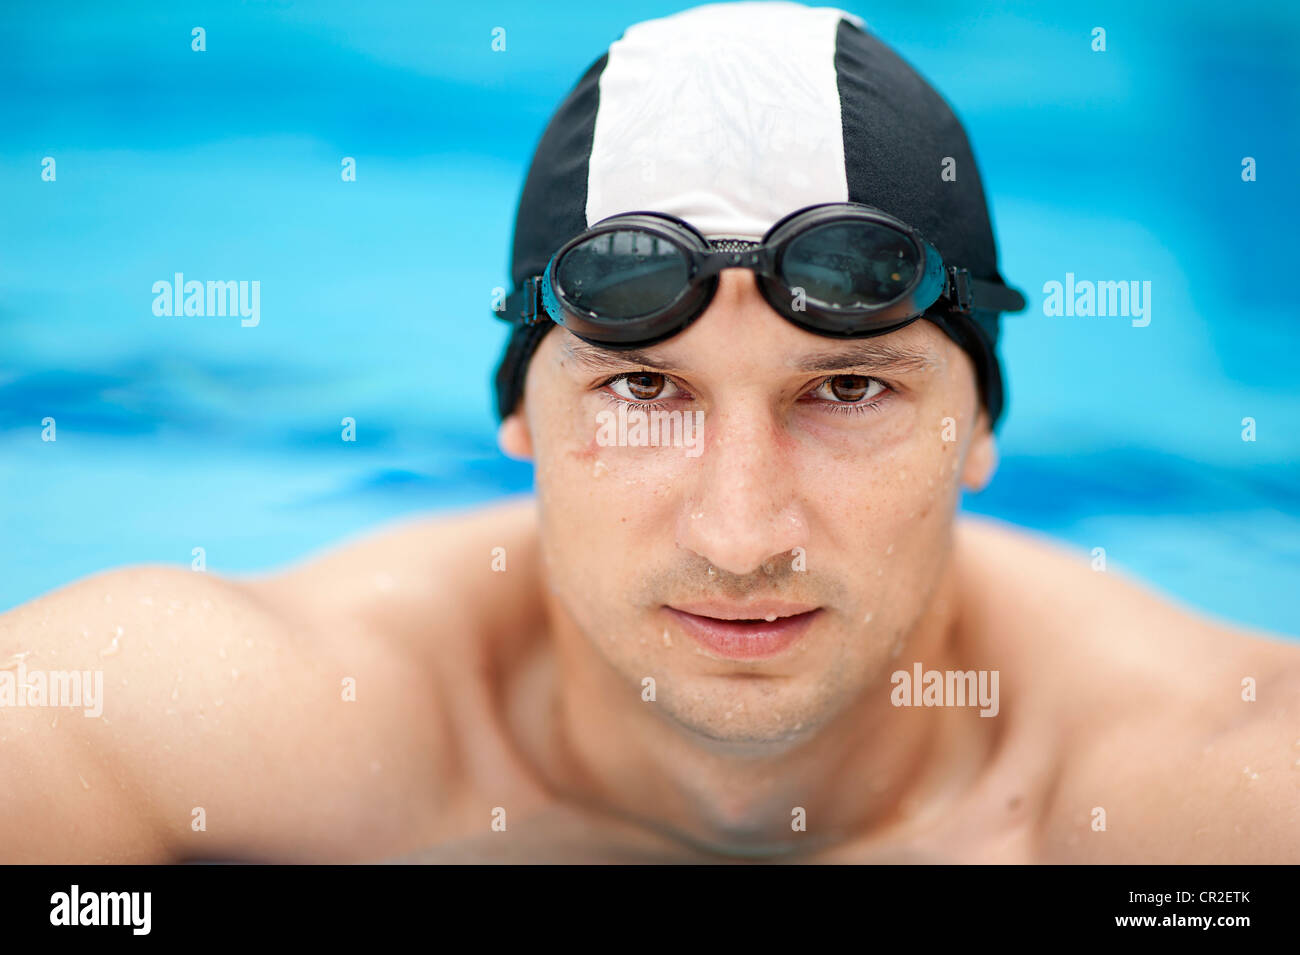 Professional male swimmer wearing a hat and goggles Stock Photo